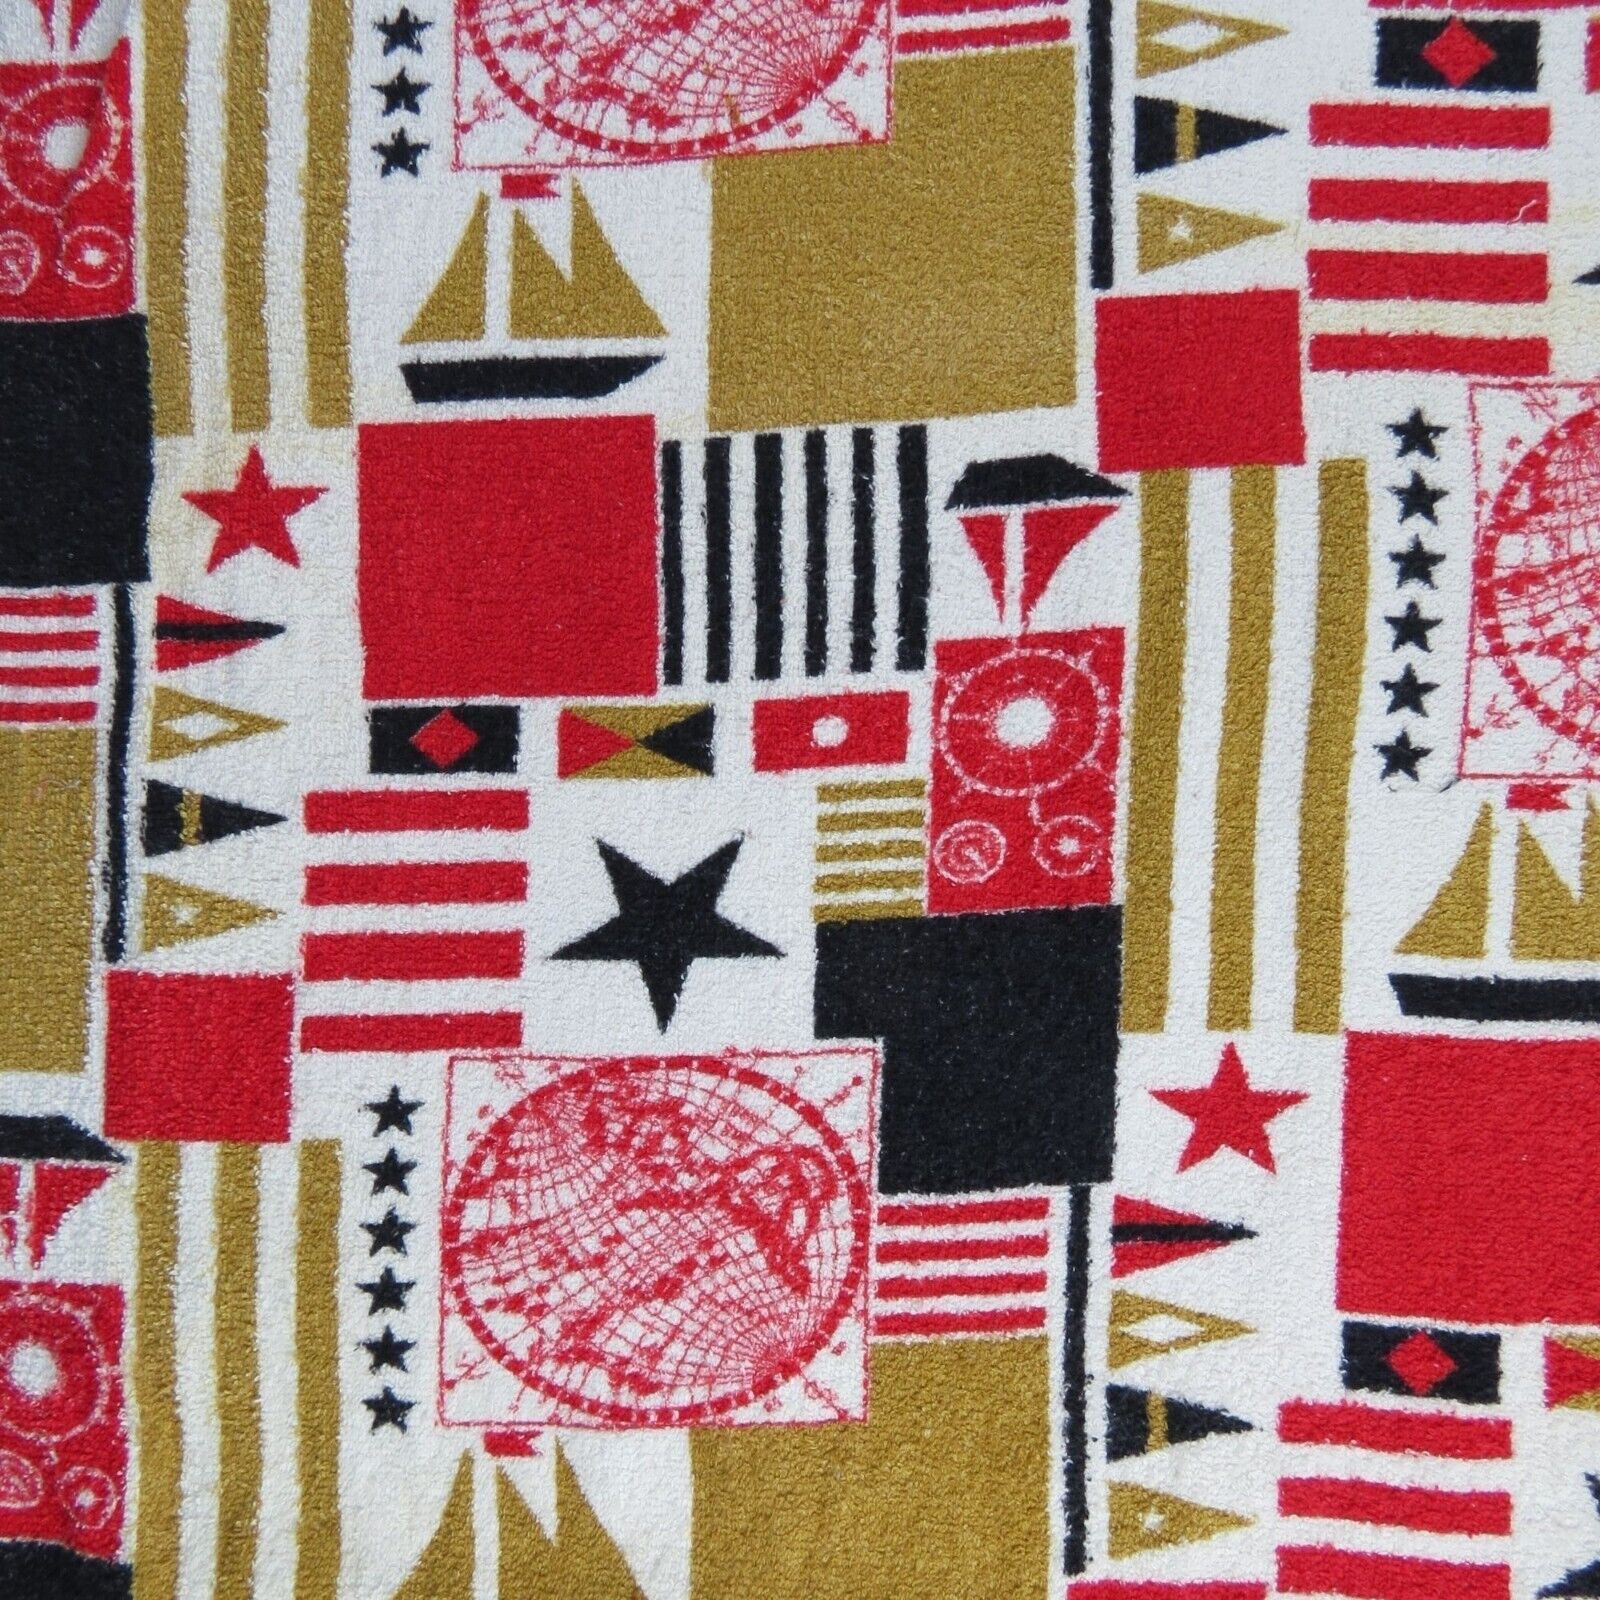 VINTAGE Nautical Cotton Terrycloth Fabric 60s 70s Red Black 2.75 yards x 37\